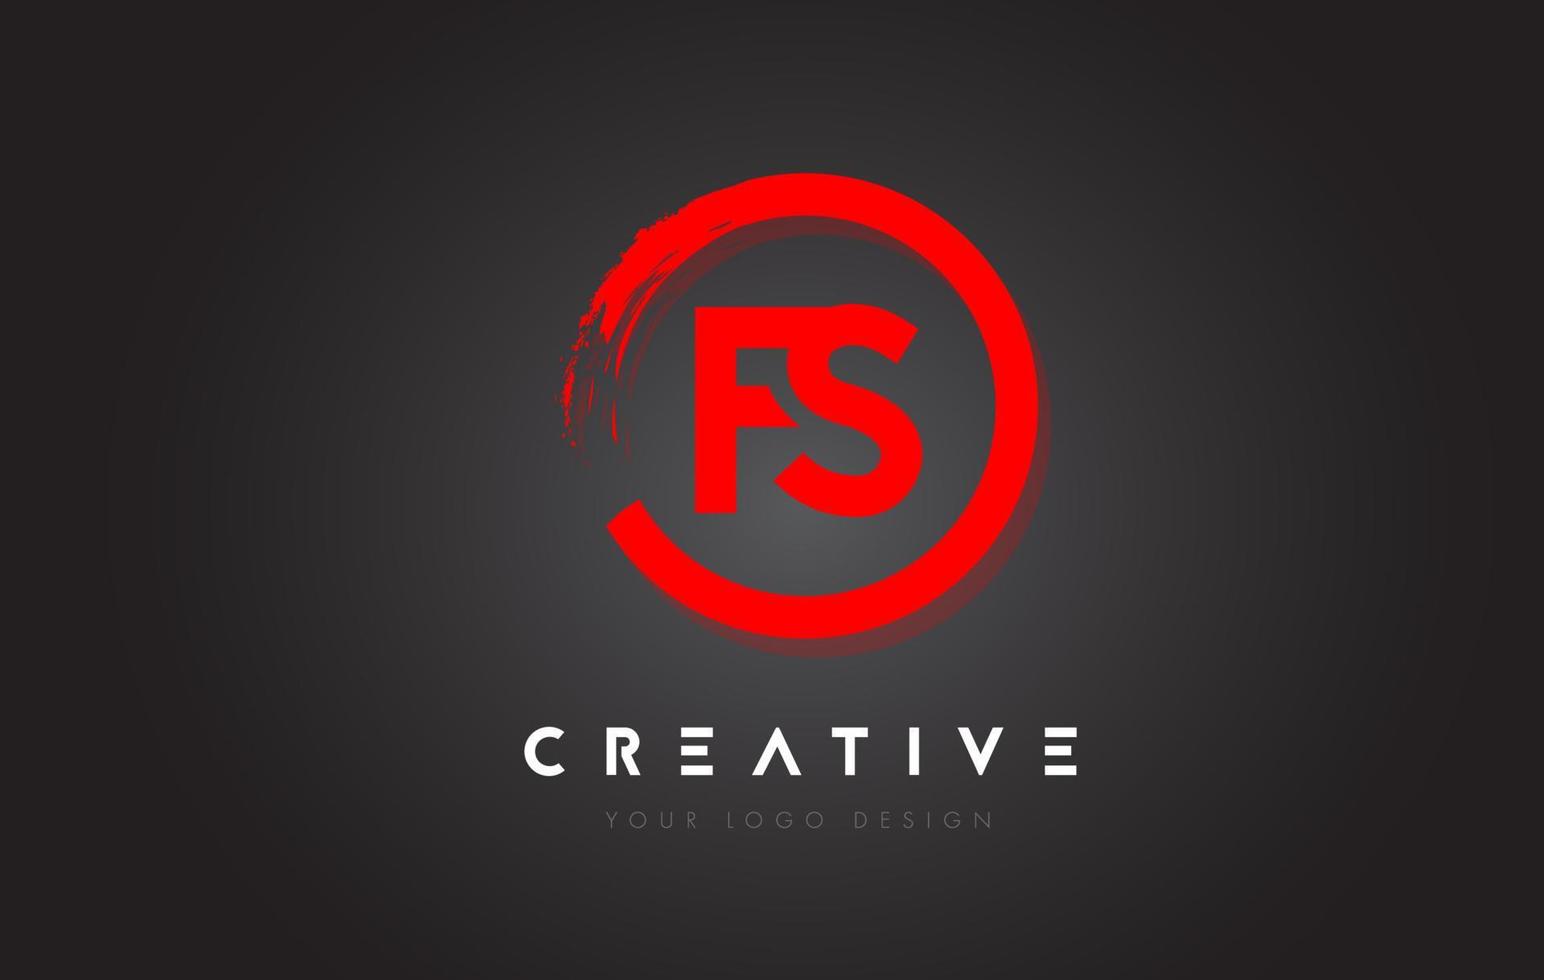 Red FS Circular Letter Logo with Circle Brush Design and Black Background. vector